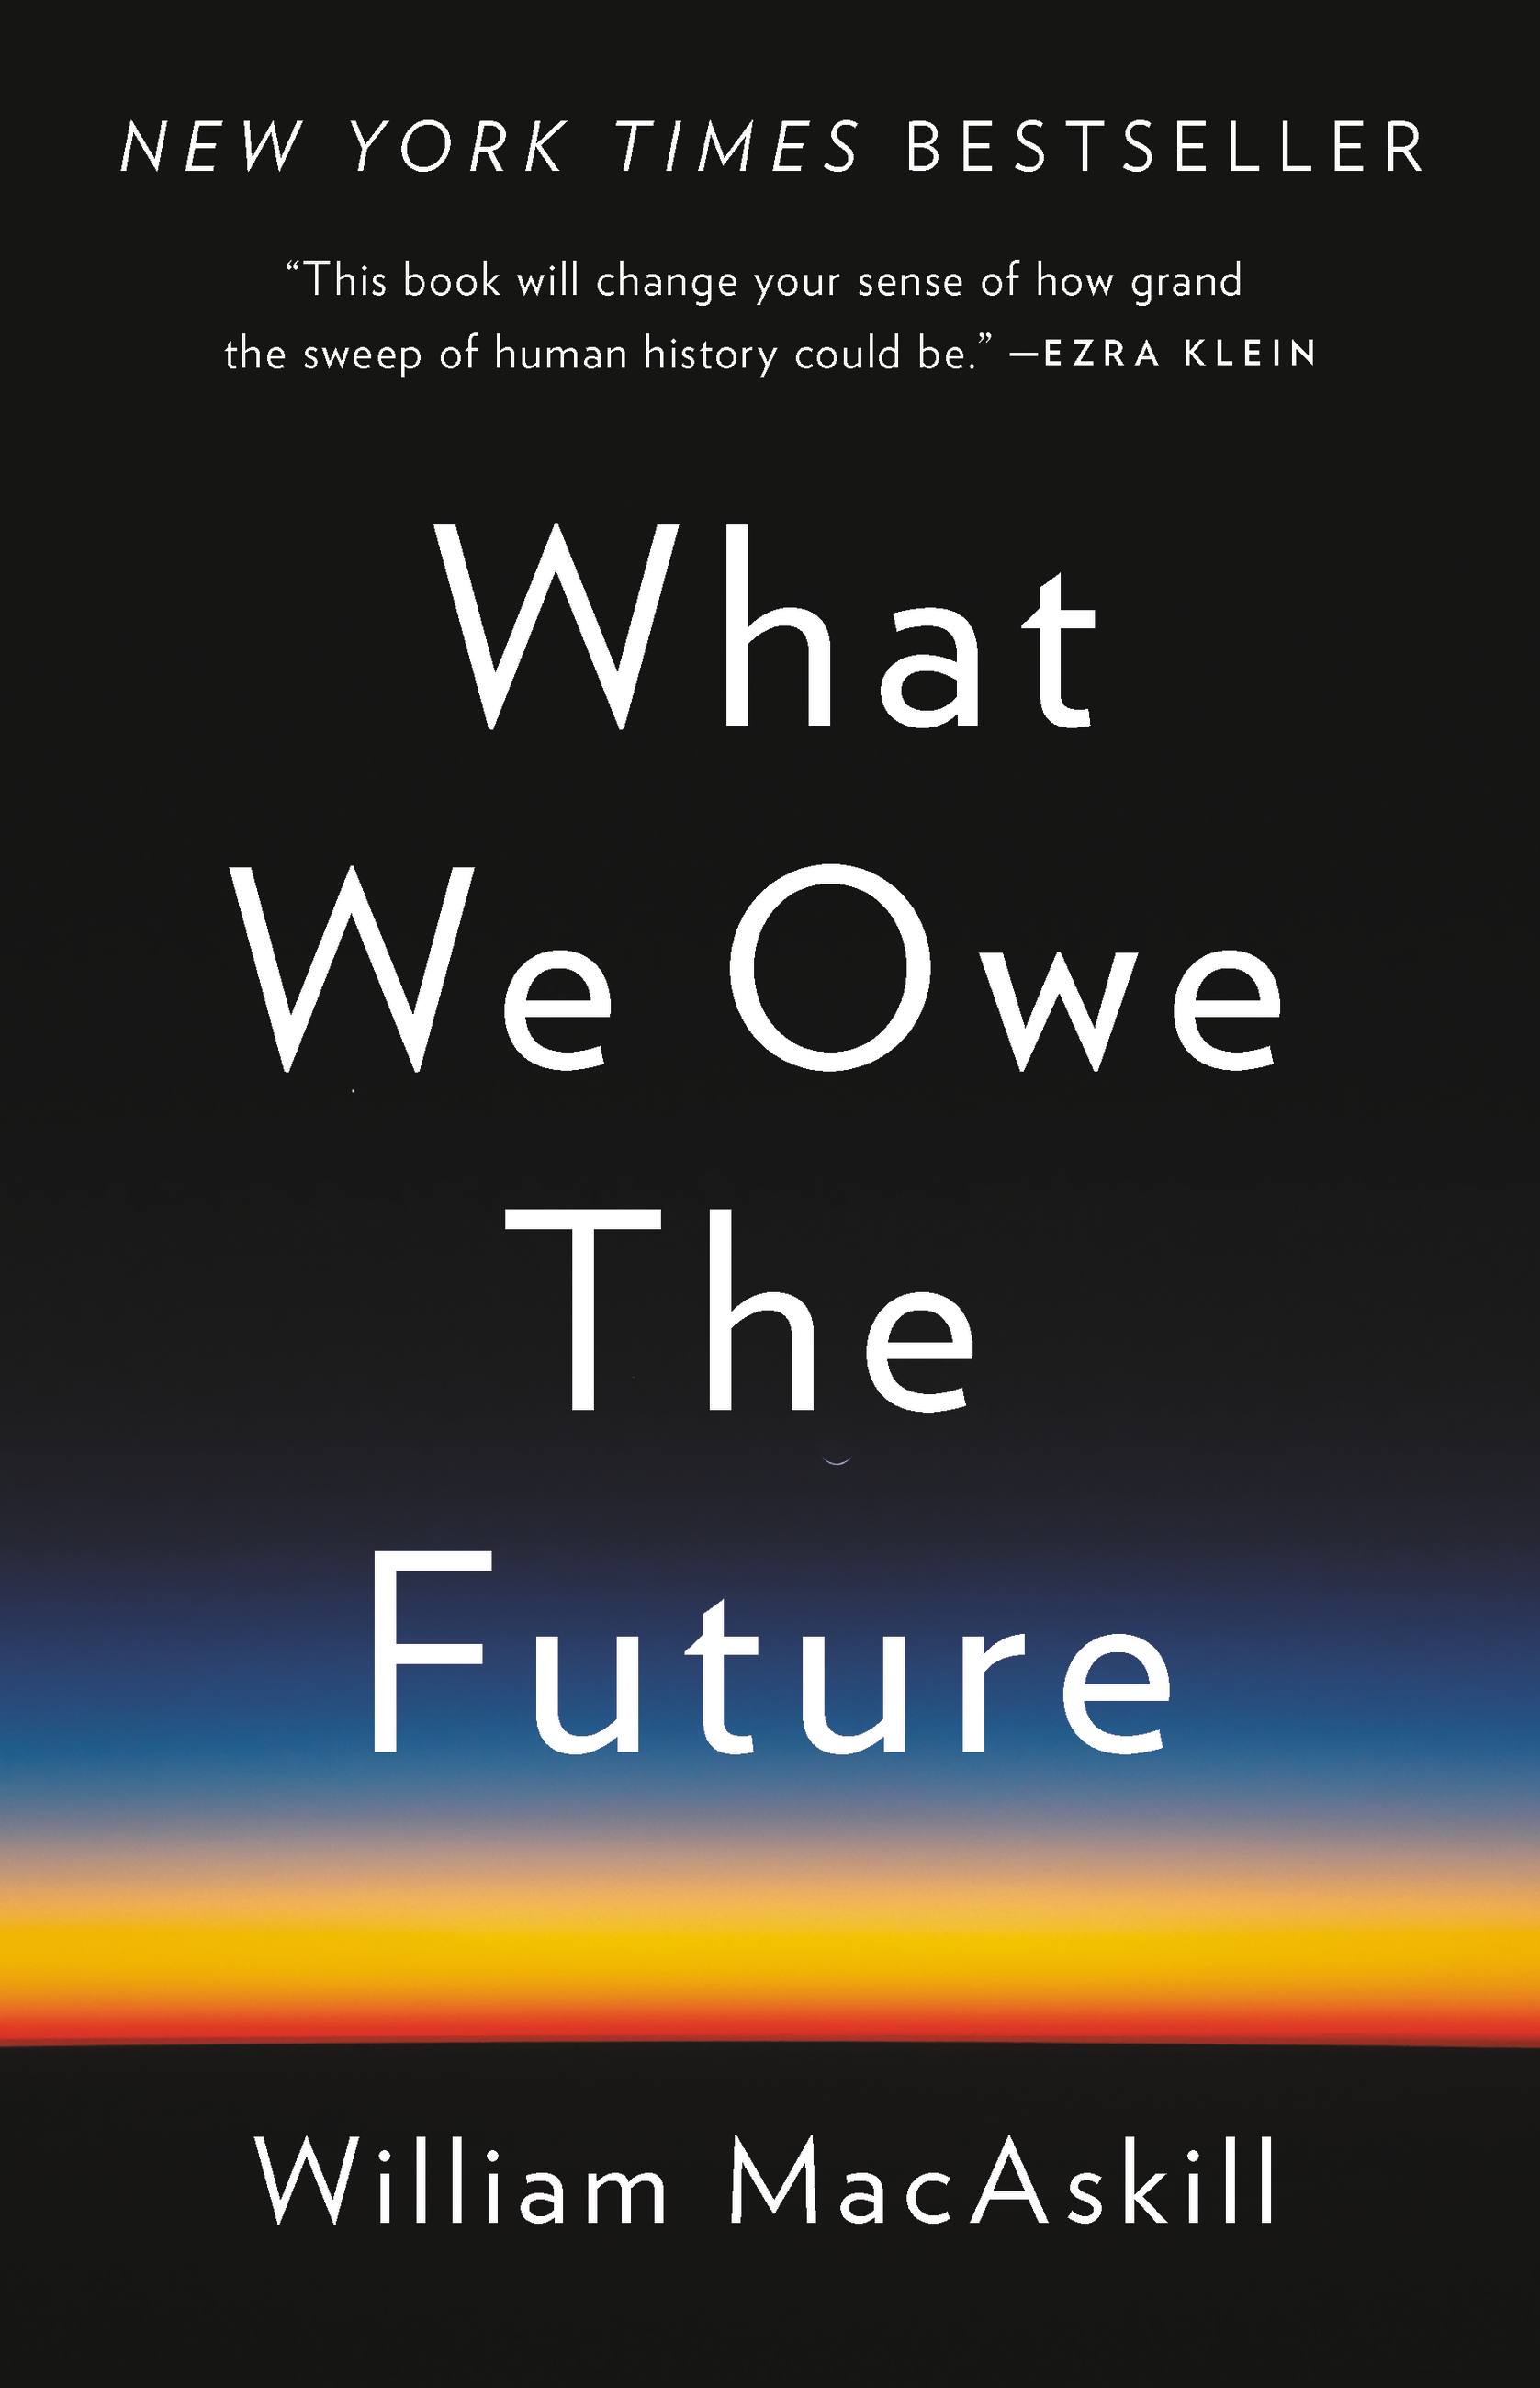 What We Owe the Future by William MacAskill Hachette Book Group